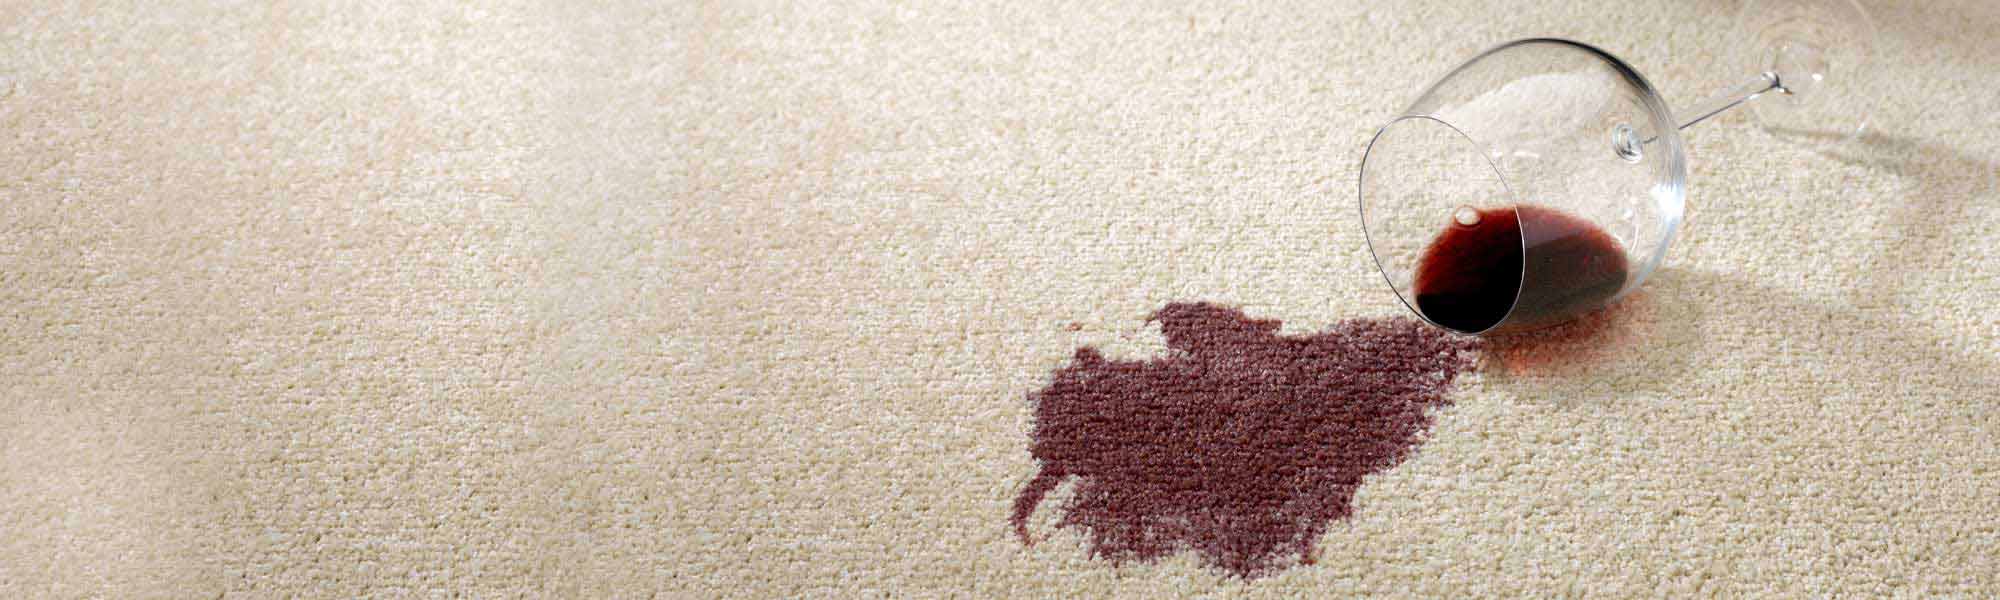 Professional Stain Removal Service by Chem-Dry of La Crosse in Onalaska and Winona